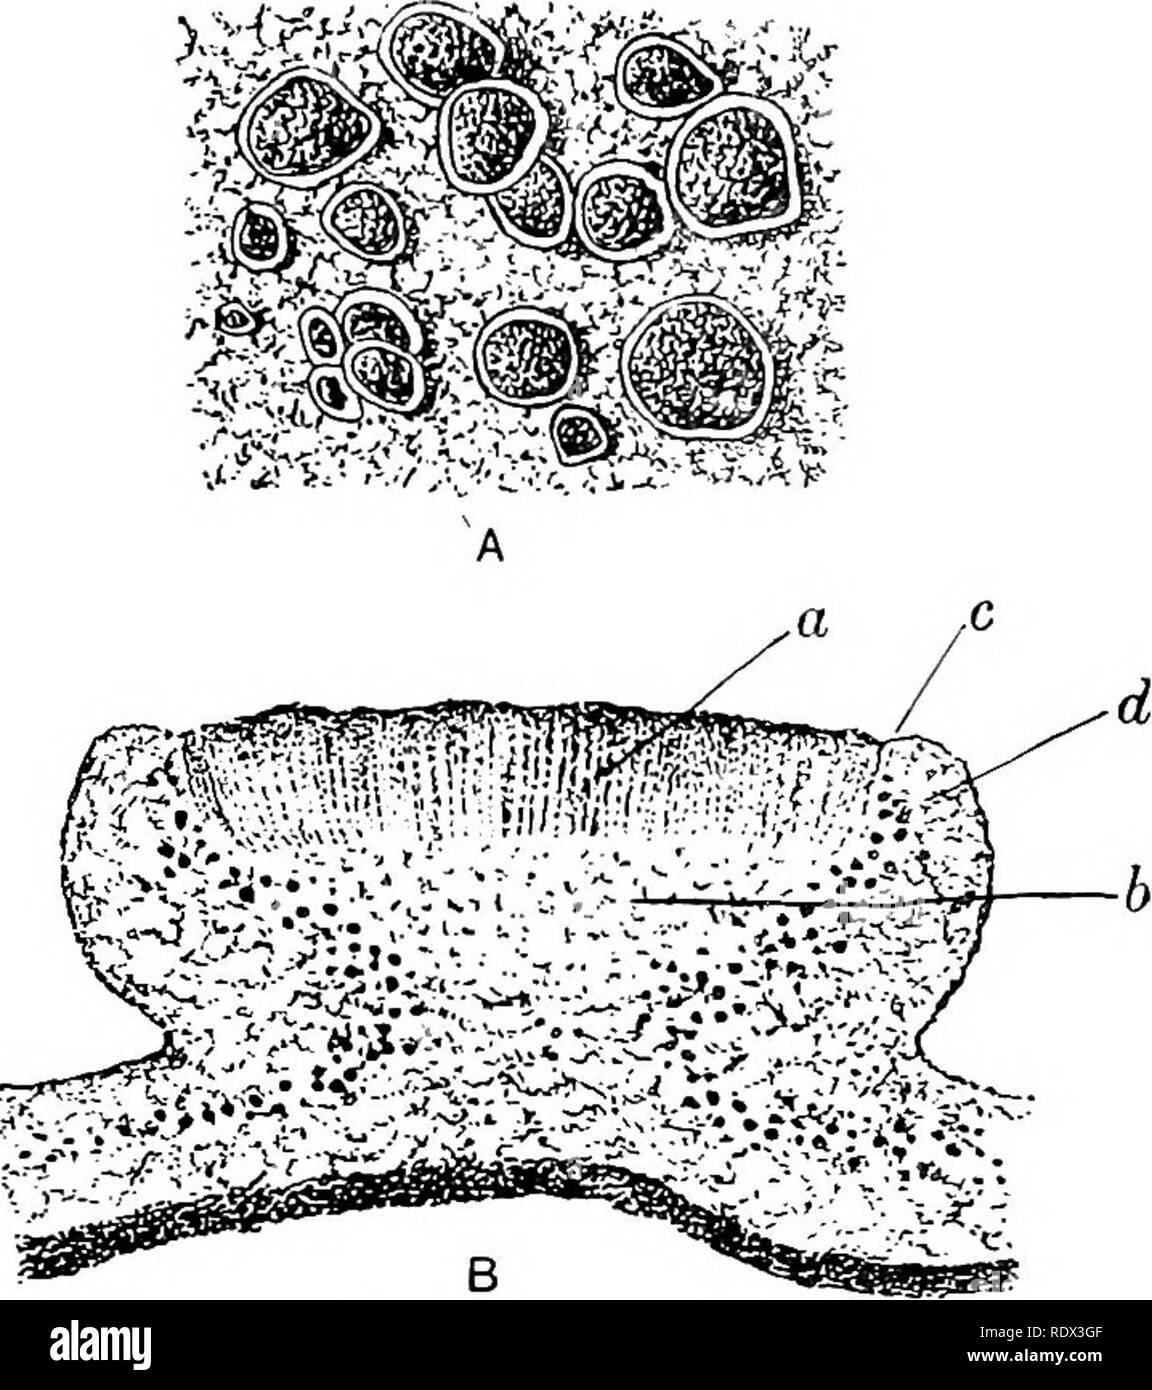 . Lichens. Lichens. REPRODUCTIVE ORGANS 157 size, rarely more than i cm. in diameter (Fig. 88); there is no development in lichen fruits equal to the cup-like ascomata of the larger Pezizae. In. Fig. 88. Lecanora subfusca Ach. A, thallus and apothecia x 3; B, vertical section of apothecium. a, hymenium; by hypo- thecium; c, thalline margin or amphithecium; d, gonidia. X 60 (after Reinke). most cases the lichen apothecium retains its vitality as a spore-bearing organ for a considerable period, sometimes for several years, and it is strengthened and protected by one or more external margins of s Stock Photo